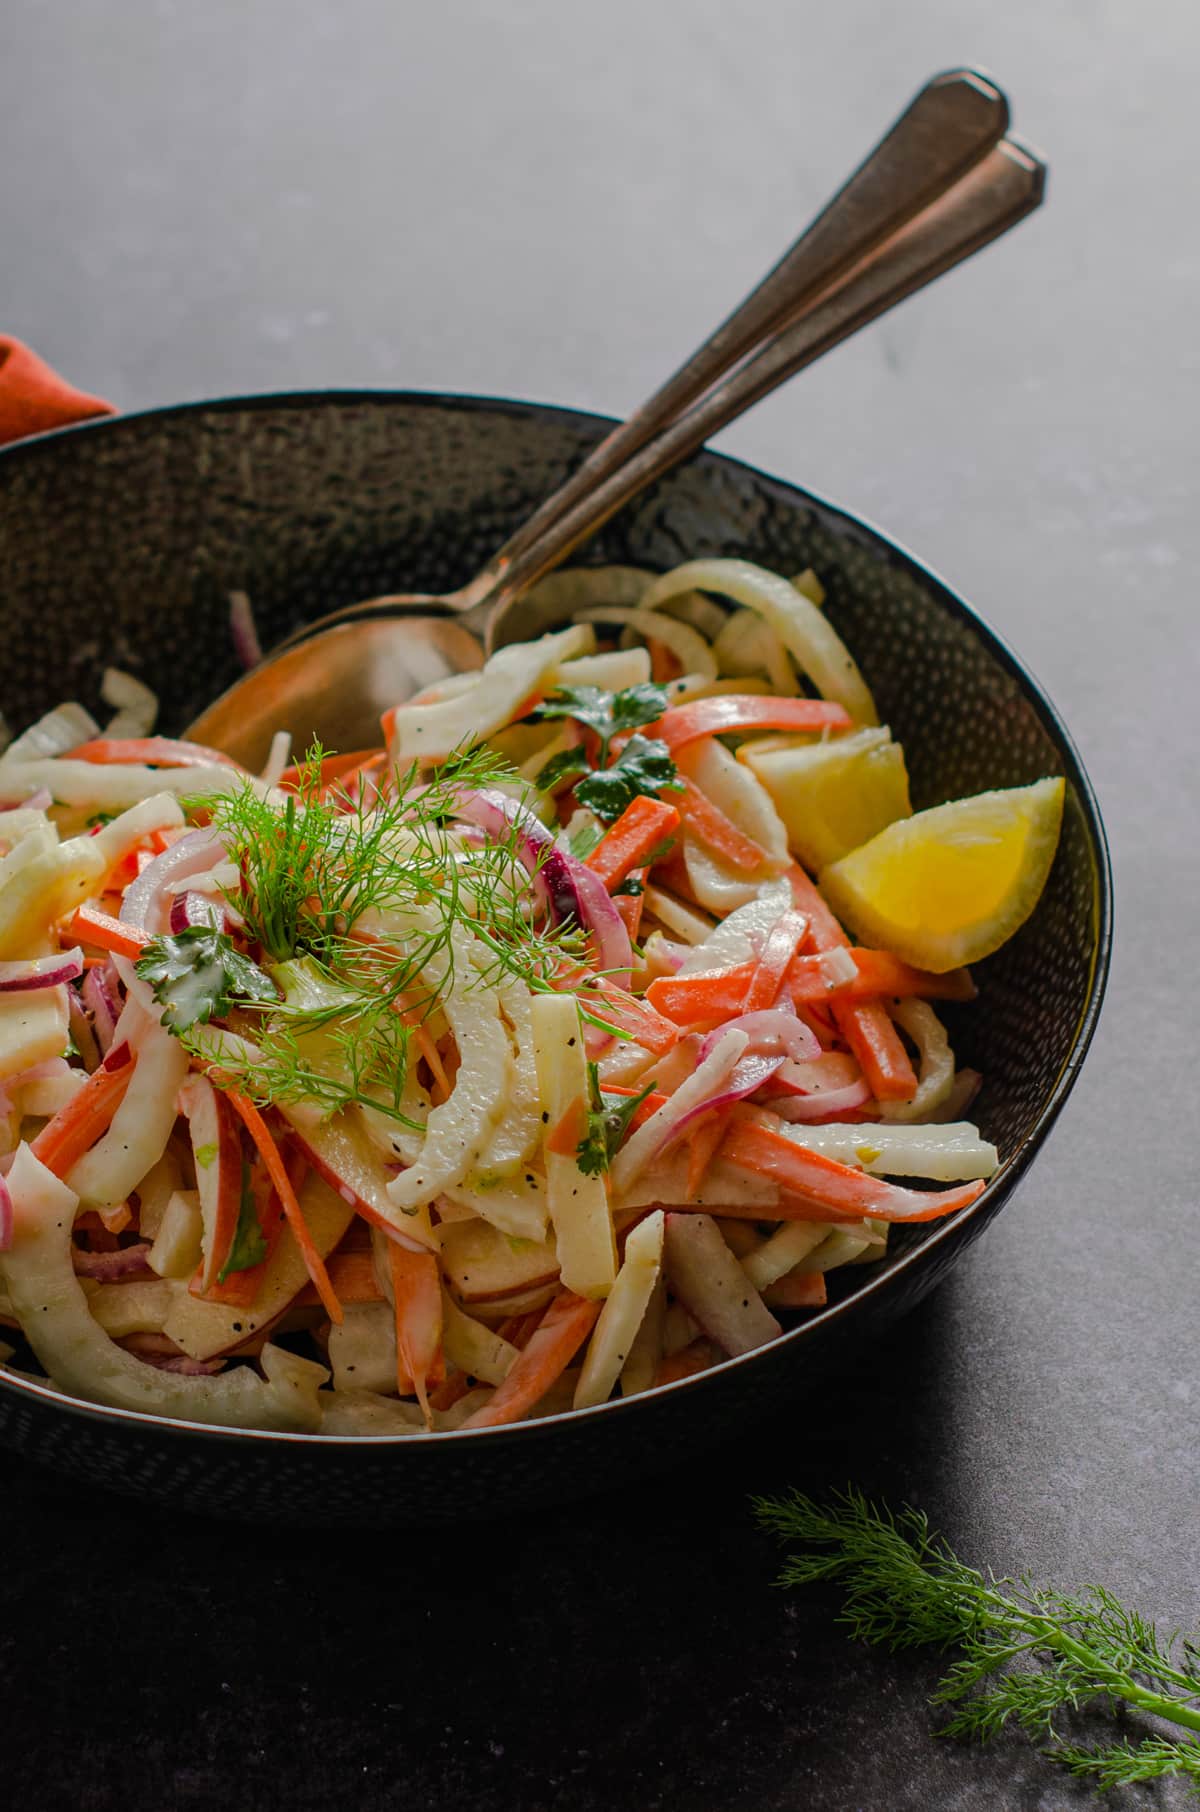 A bowl of coleslaw topped with springs of fennel tops.